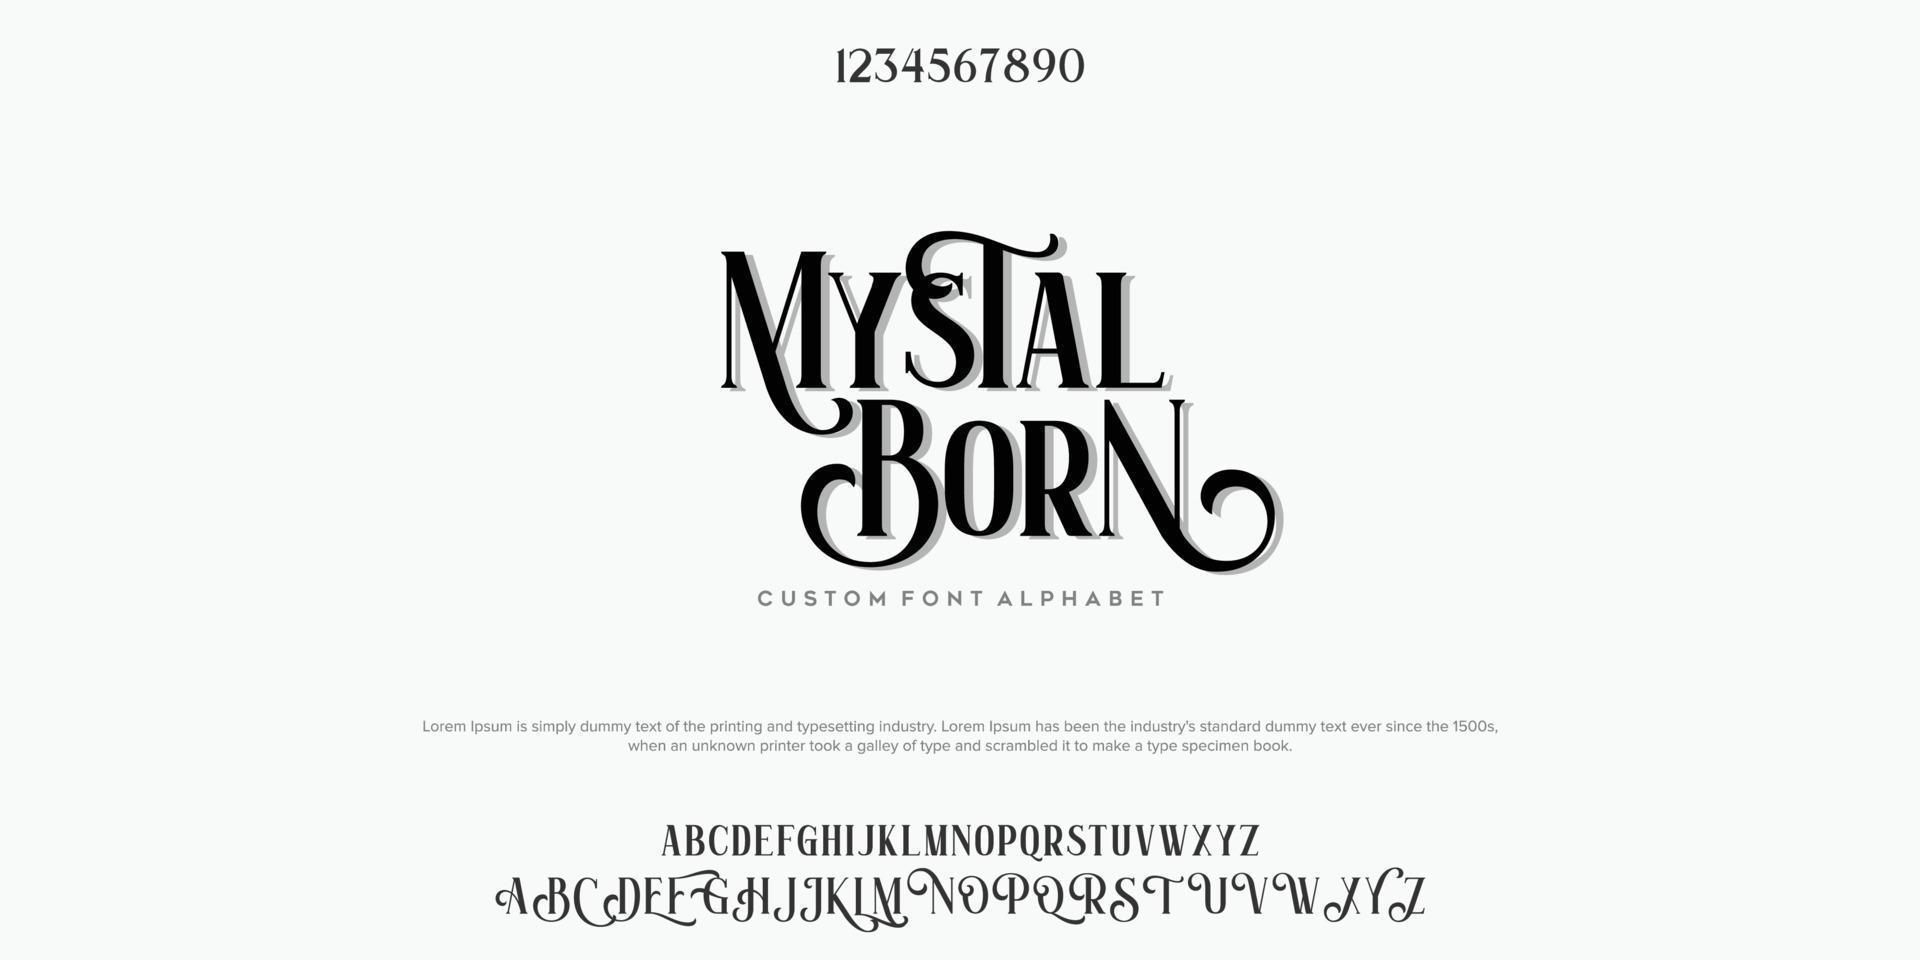 Mystal Born Abstract Fashion font alphabet. Minimal modern urban fonts for logo, brand etc. Typography typeface uppercase lowercase and number. vector illustration